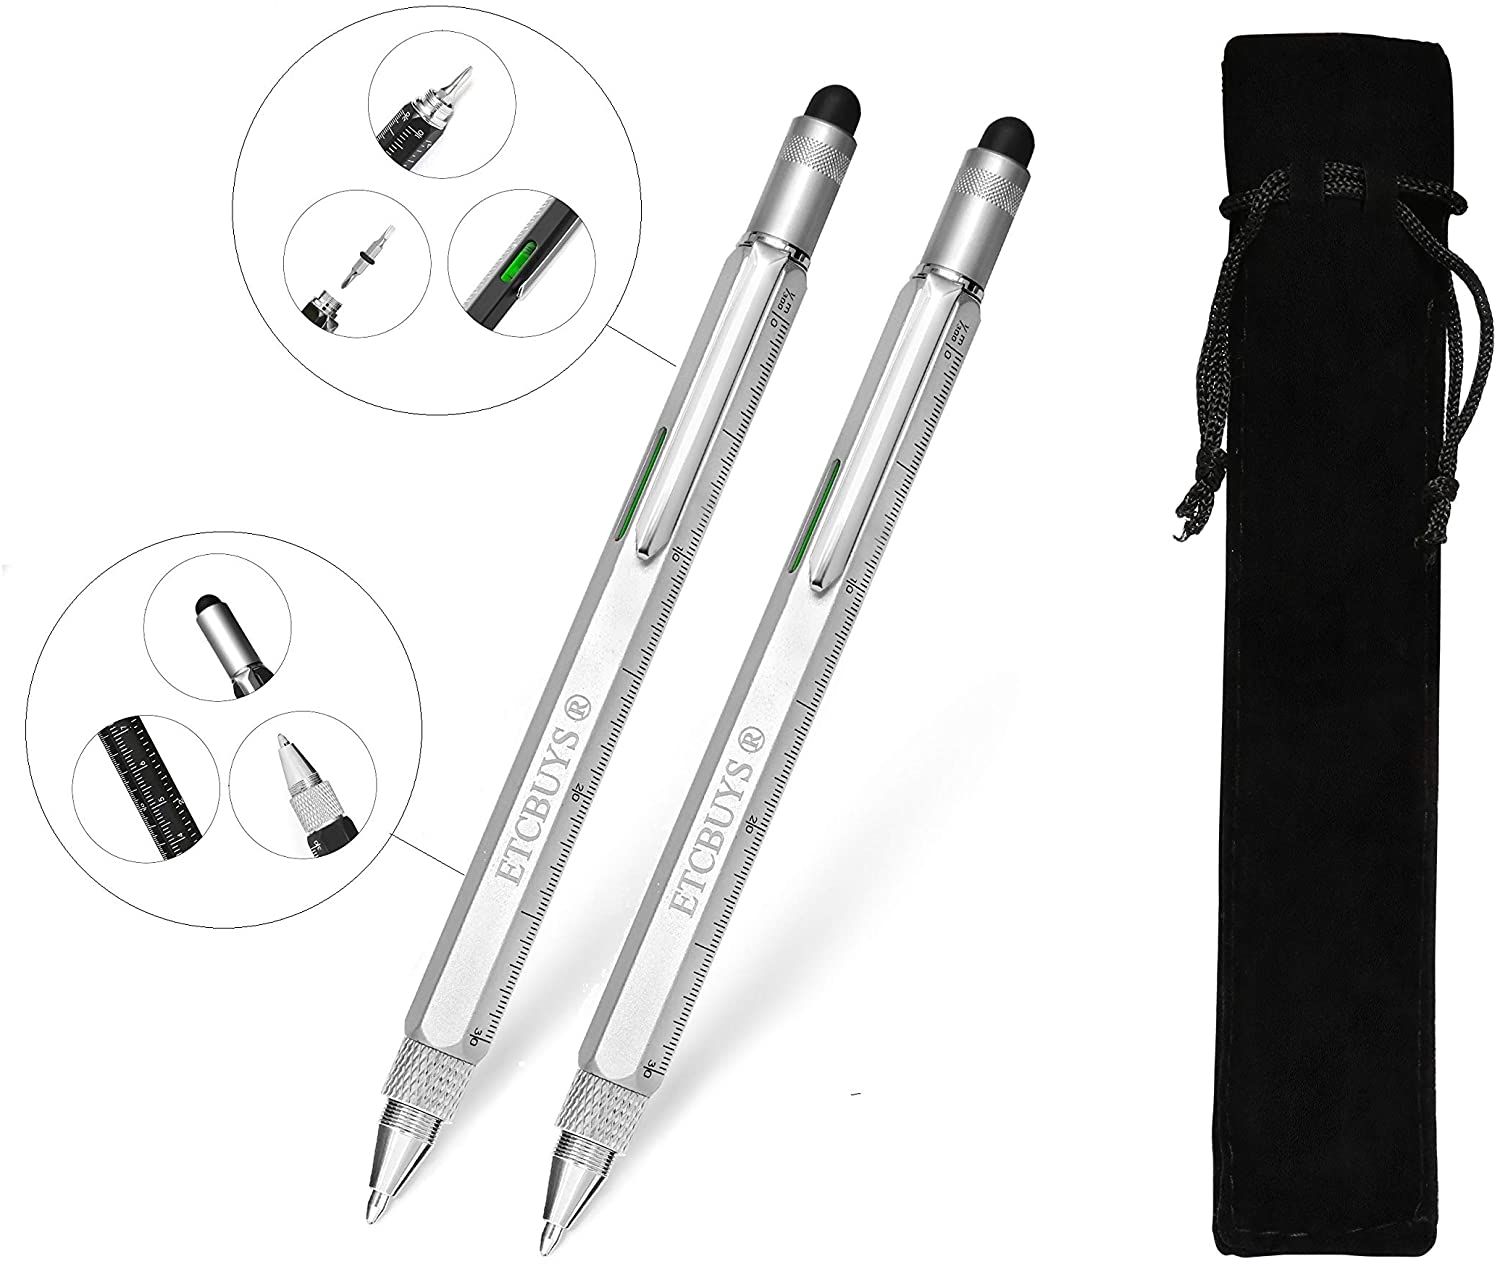 ETCBUYS Screwdriver Pen Pocket Multi Tool 6 in 1 - Silver 2 Pack